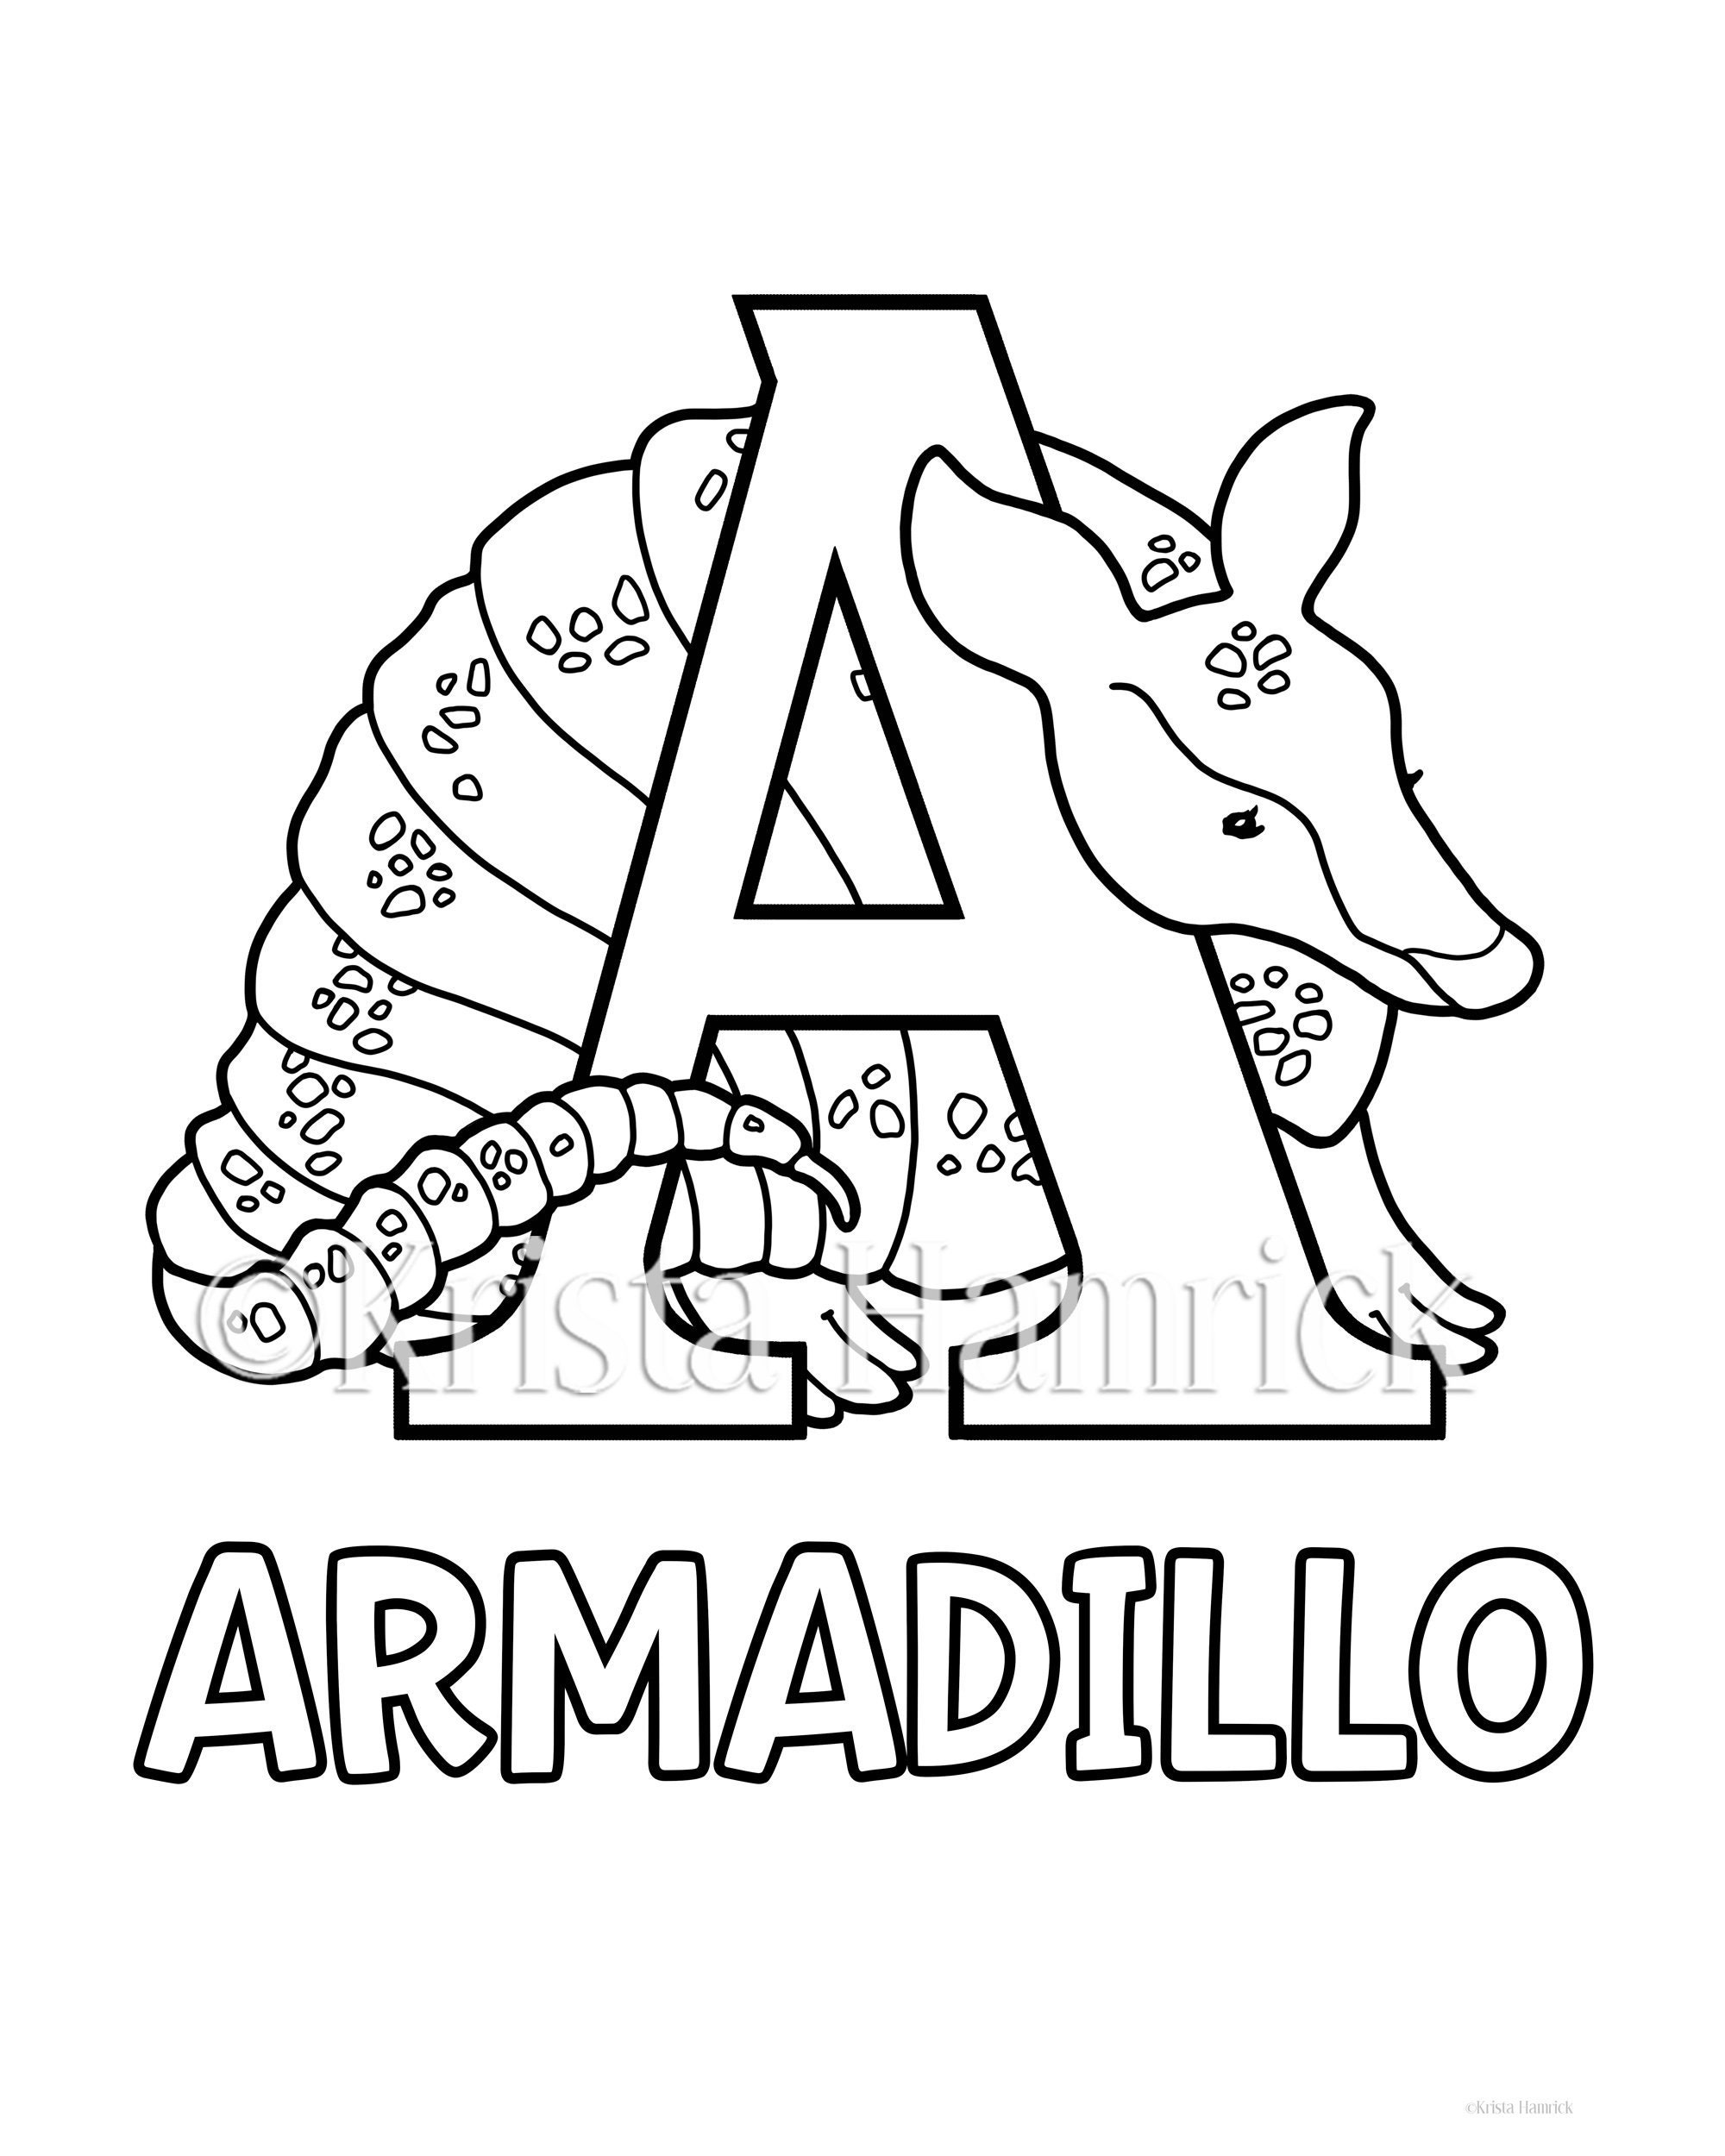 Animal Alphabet, A Z animal coloring pages, 20 pages